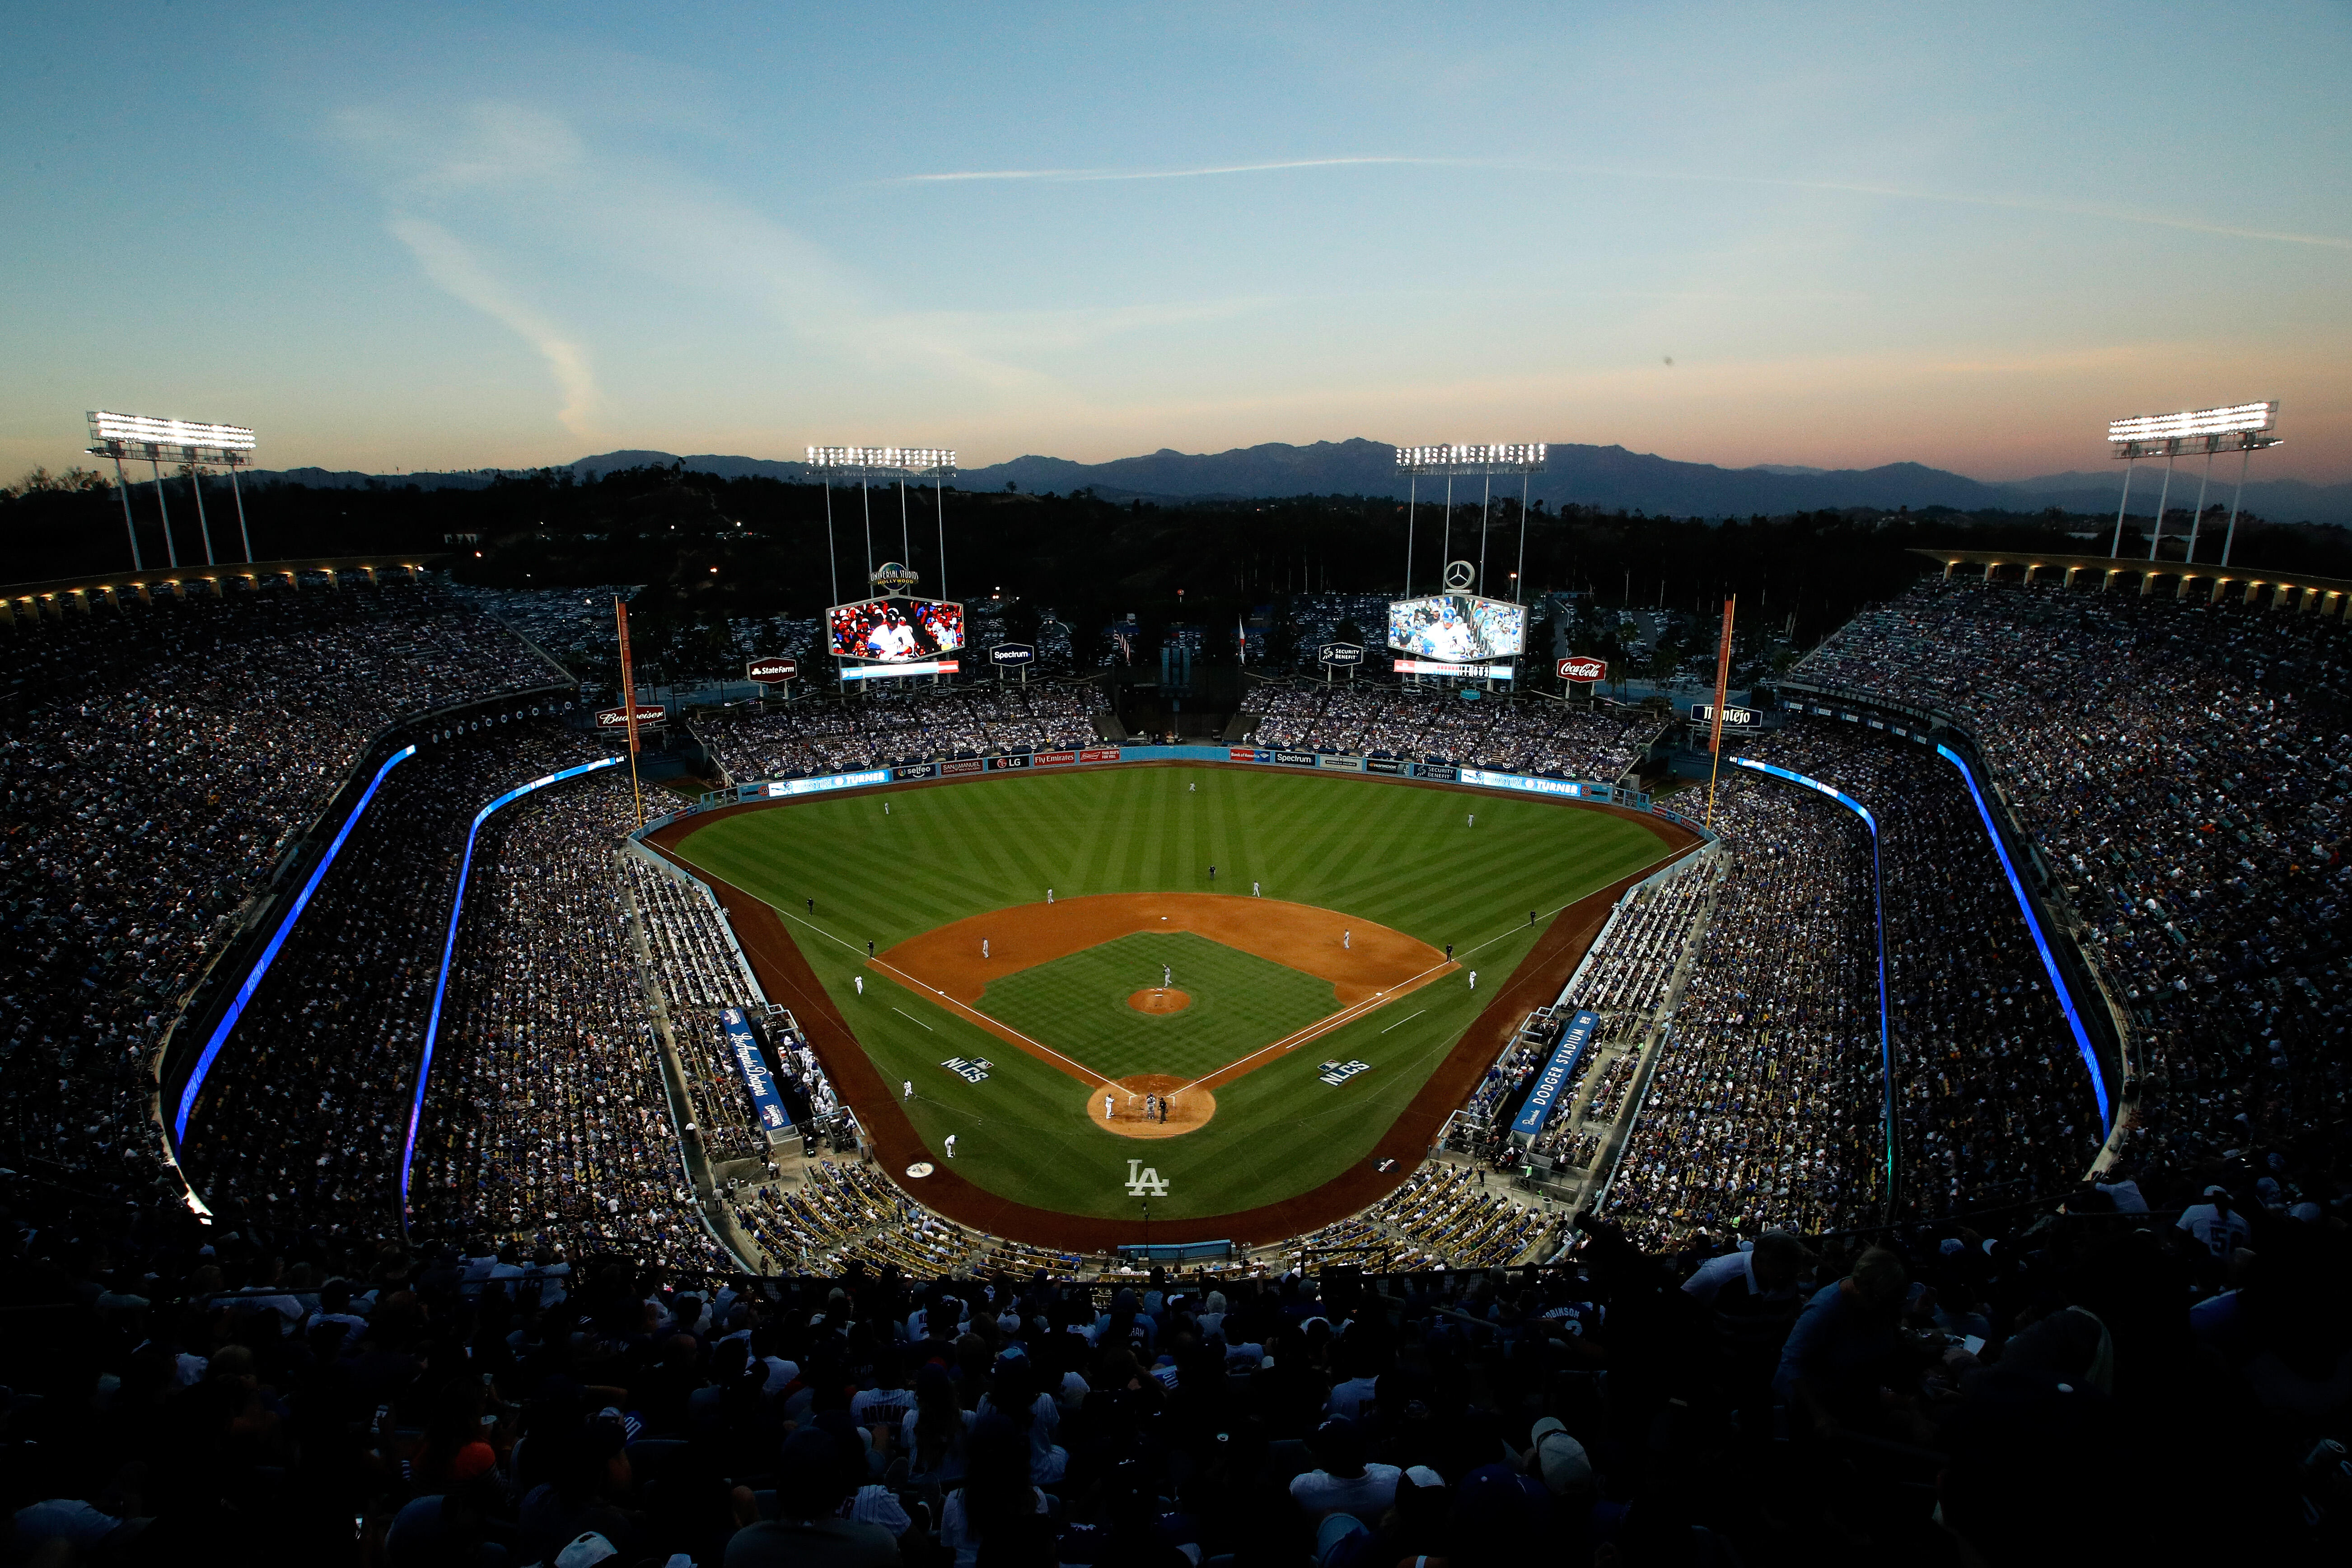 LOS ANGELES, CA - OCTOBER 20:  A general view as the Chicago Cubs take on the Los Angeles Dodgers in game five of the National League Division Series at Dodger Stadium on October 20, 2016 in Los Angeles, California.  (Photo by Josh Lefkowitz/Getty Images)